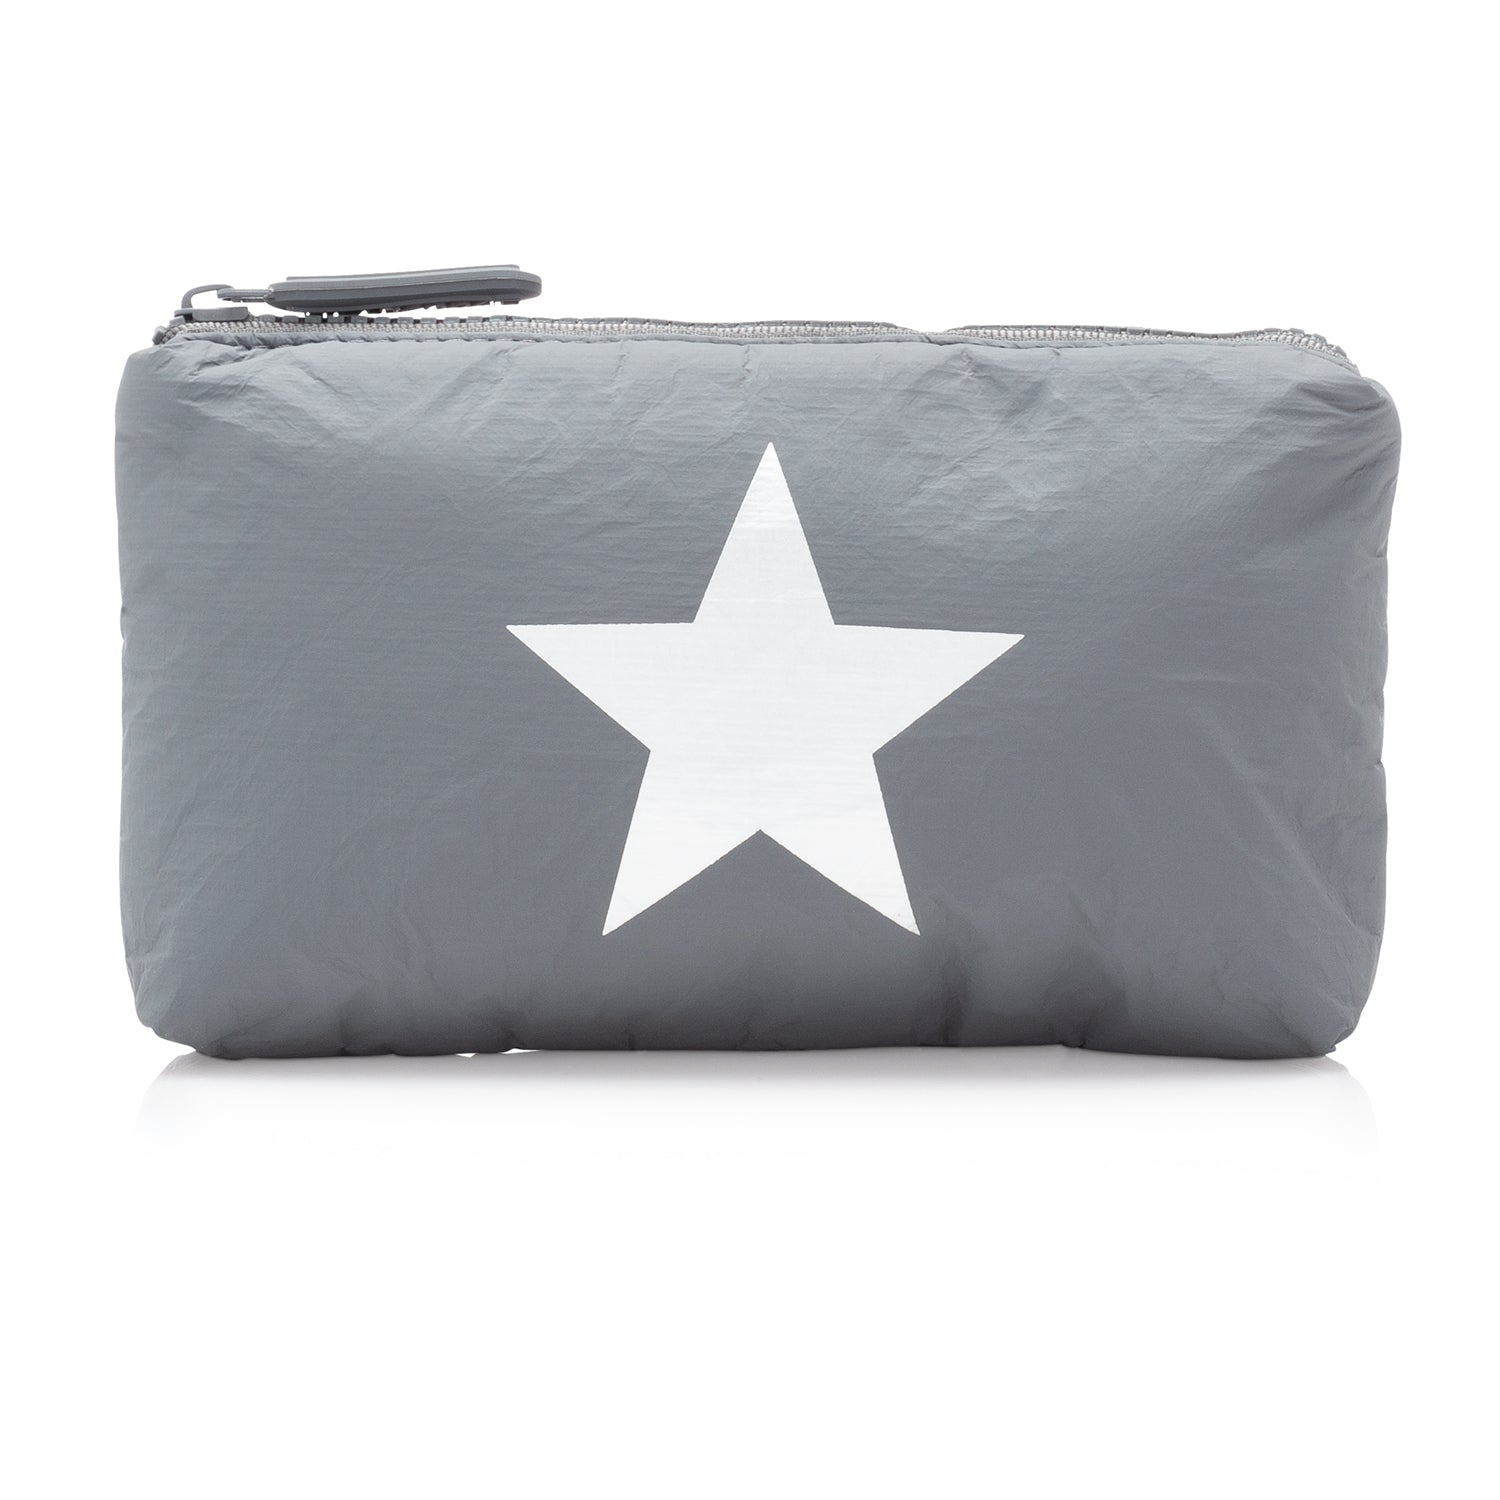 Mini Zipper Pack in Cool Gray with Silver Star